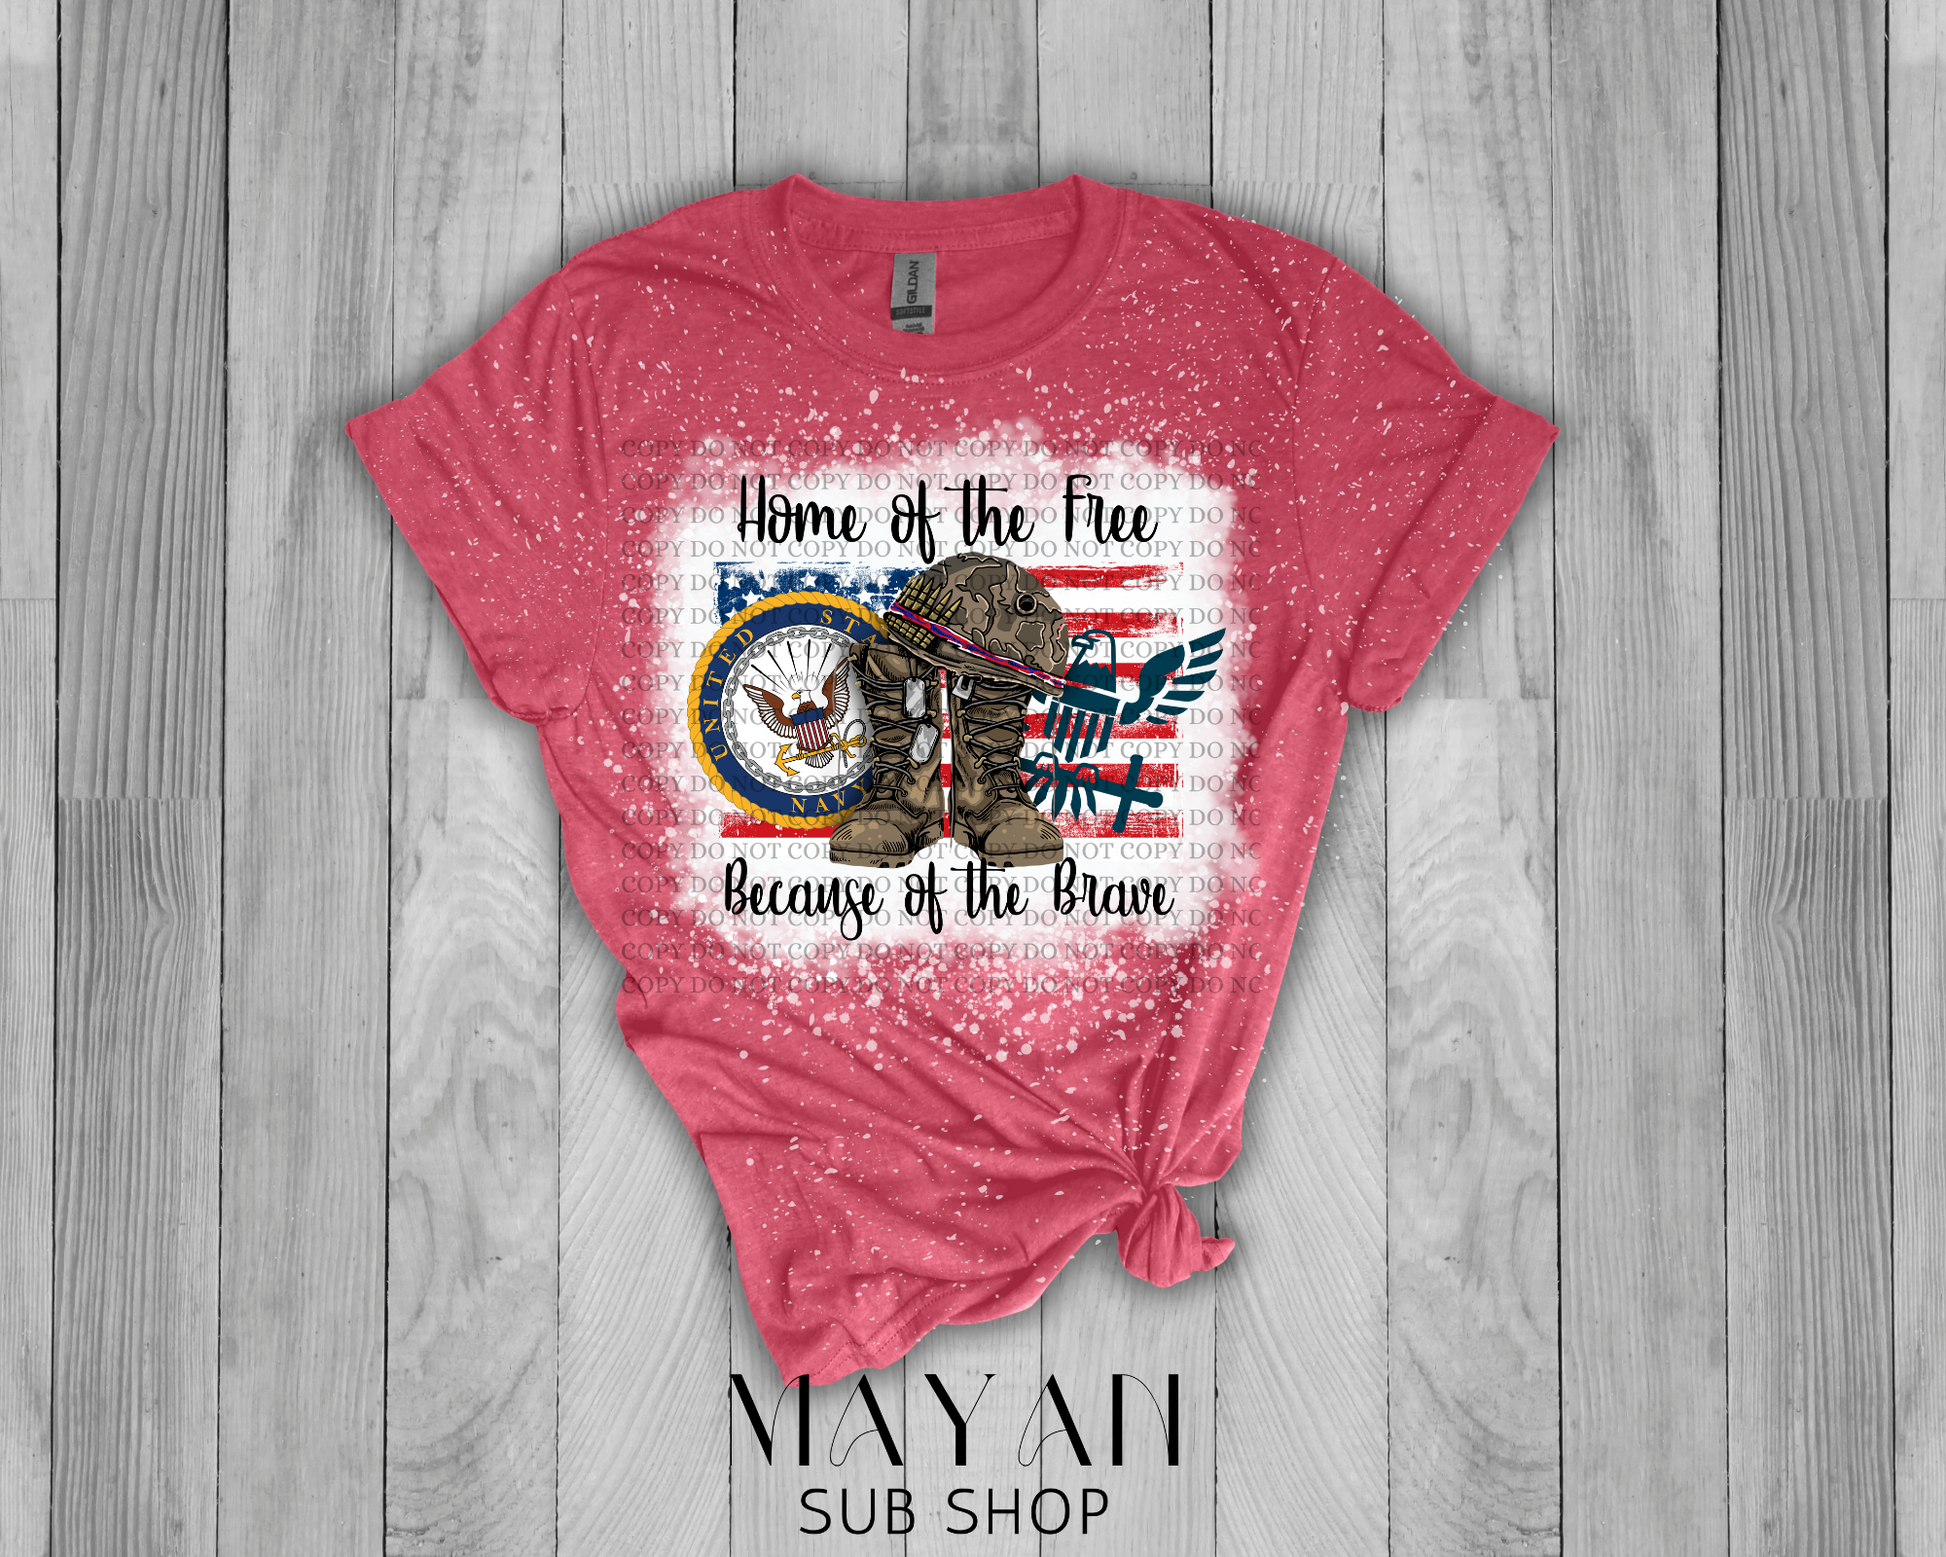 Home of the Free Navy Bleached Shirt - Mayan Sub Shop